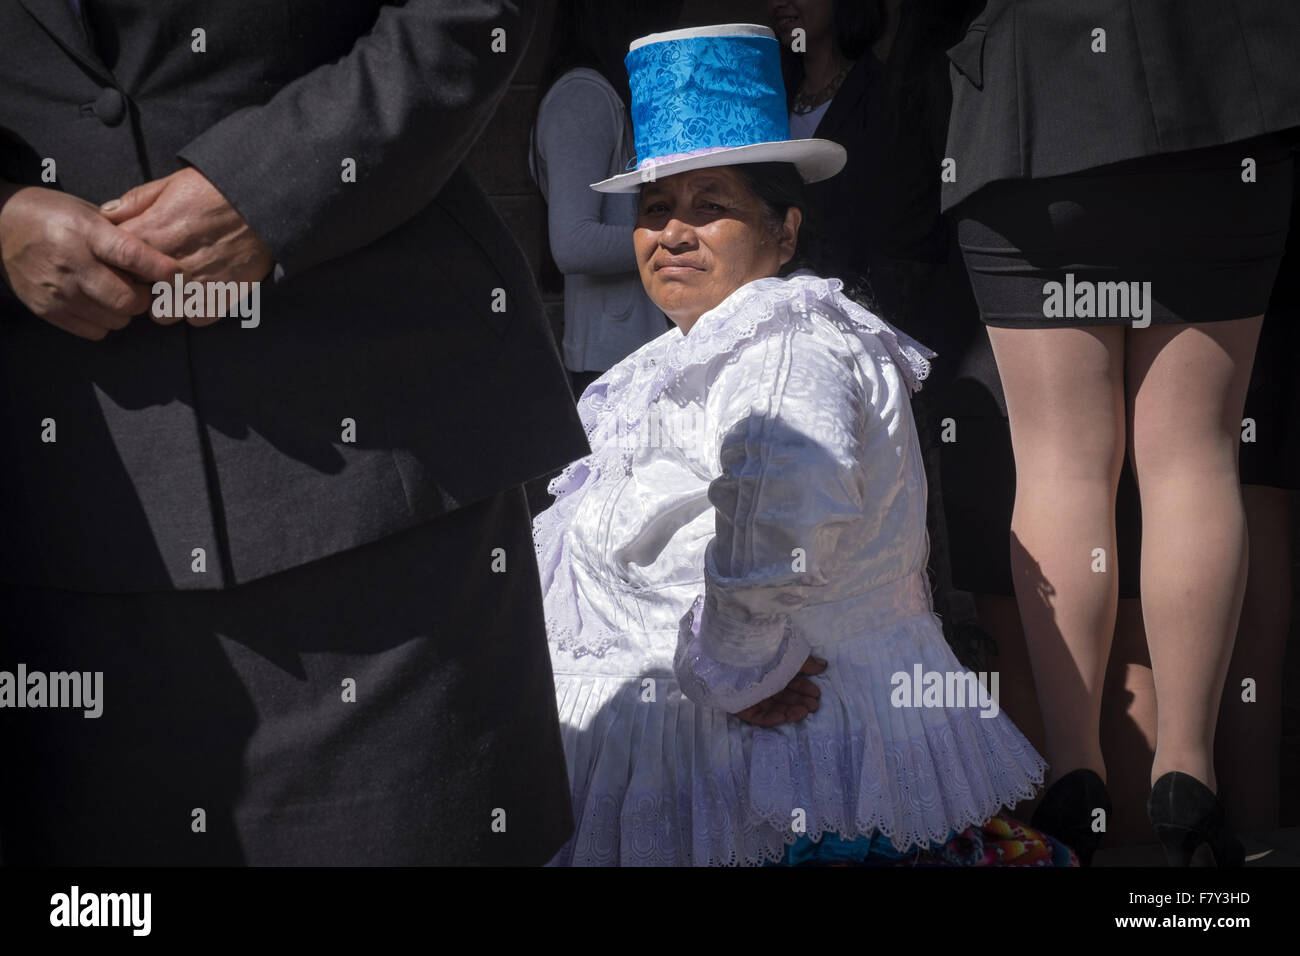 Members of civil associations participate in parades organized in the June festivities in Cuzco. Stock Photo